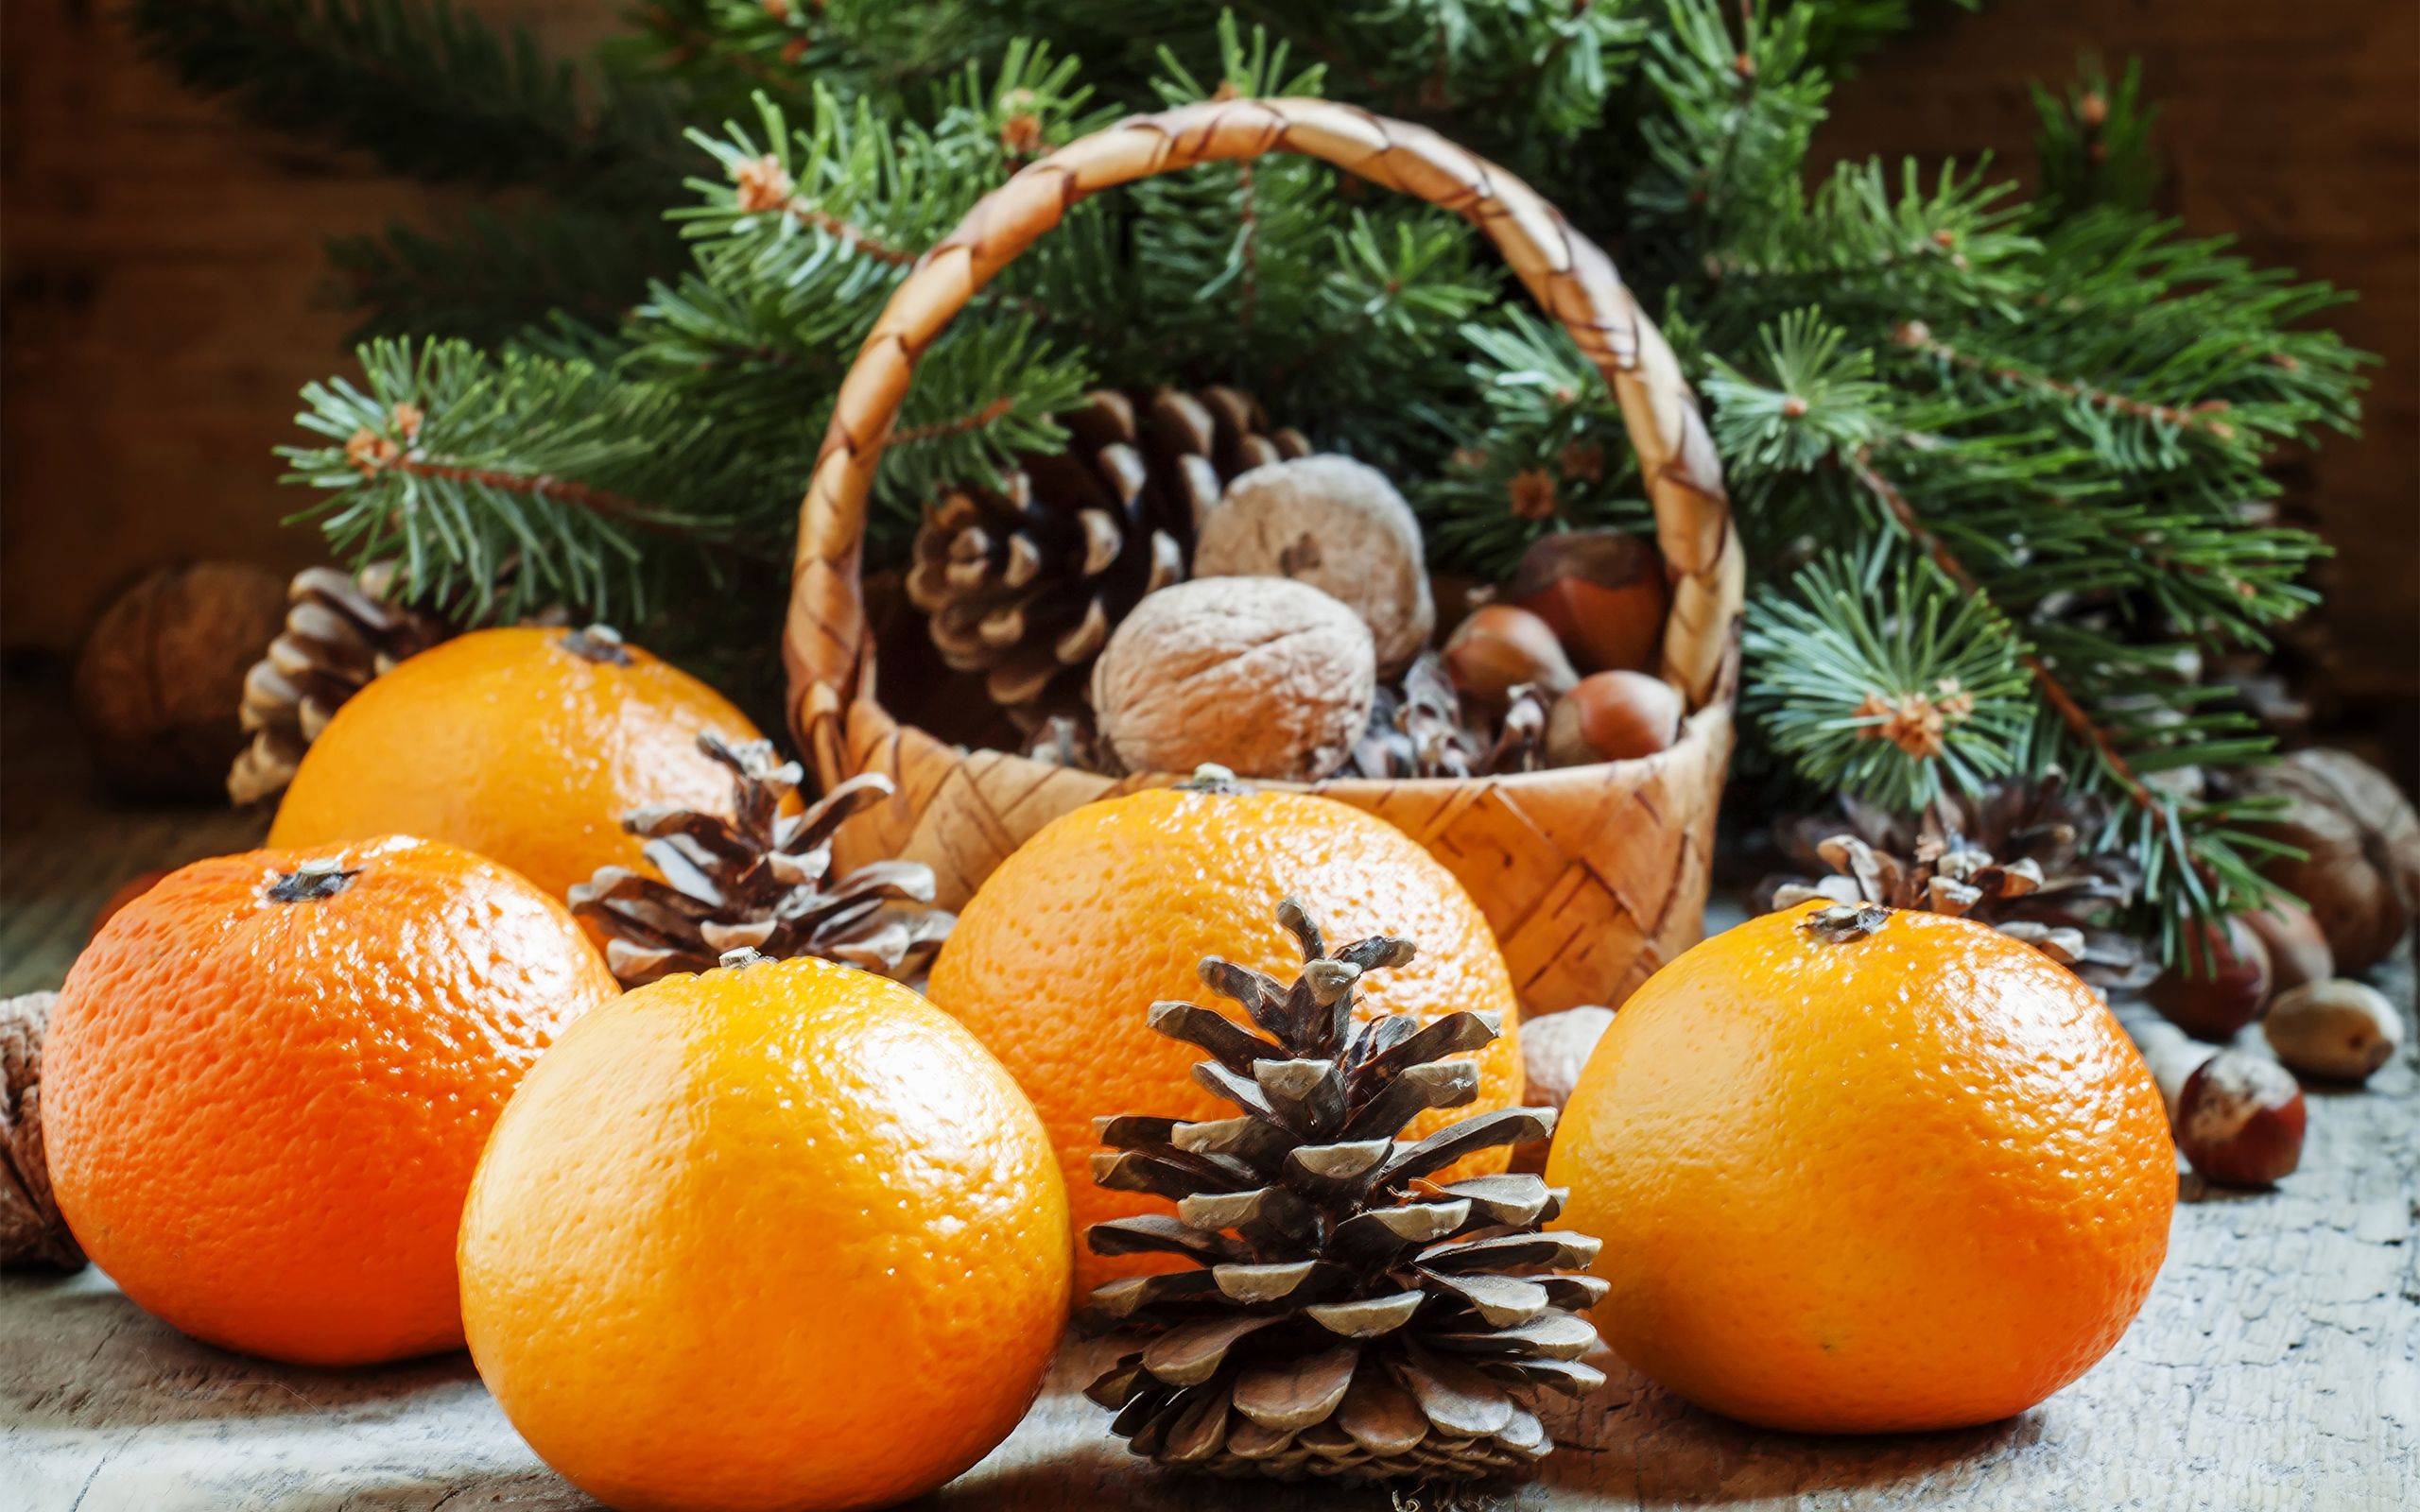 Christmas Wallpaper With Oranges Quality Image And Transparent PNG Free Clipart